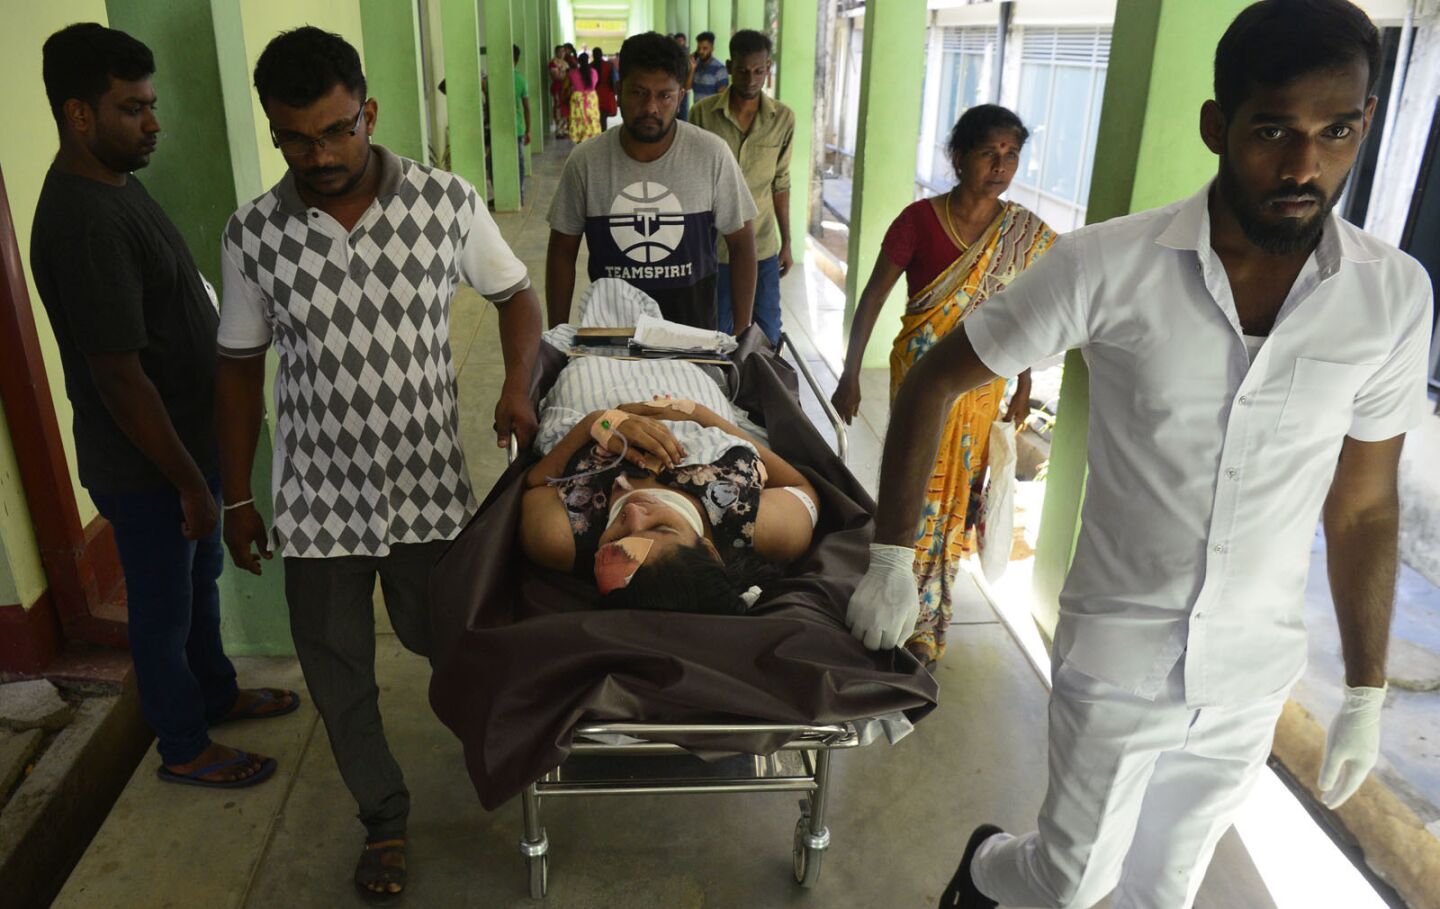 An injured Sri Lankan woman is moved on a hospital stretcher after an explosion at a Batticaloa church.